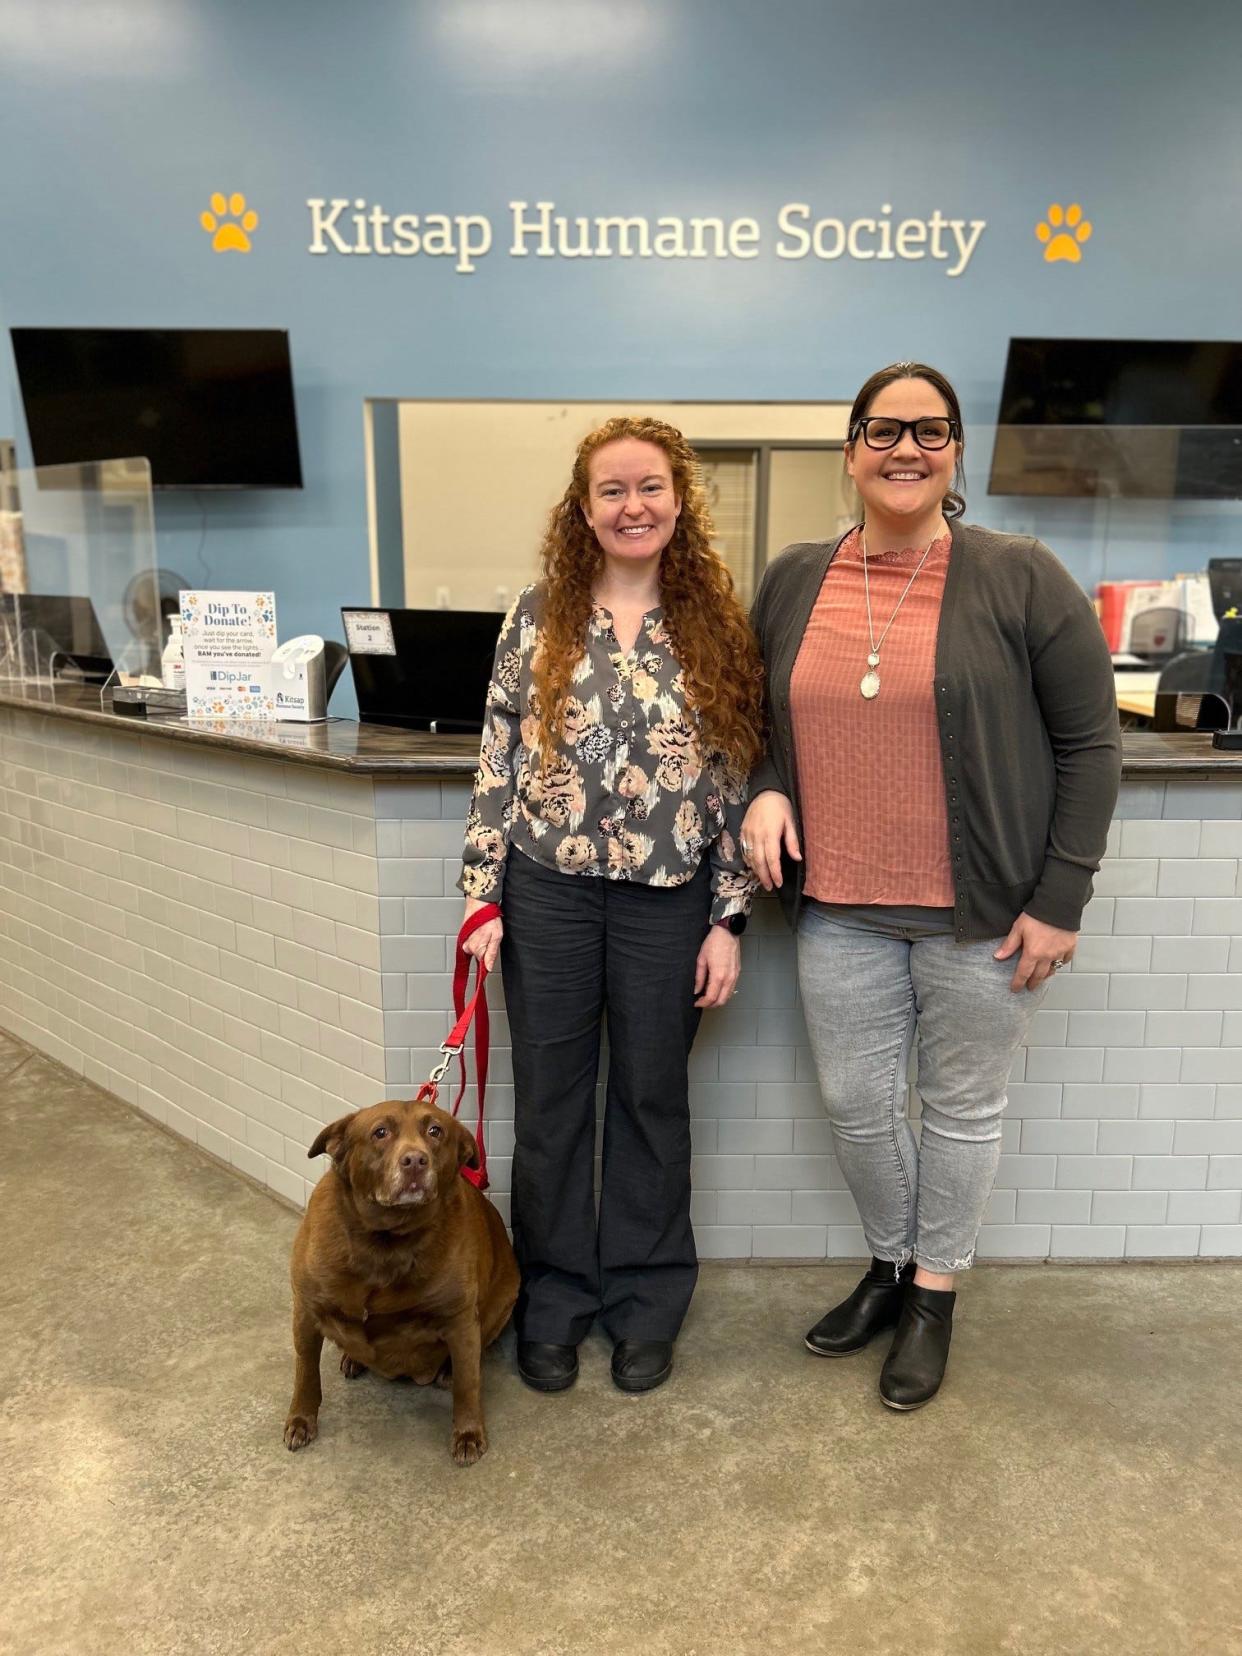 Jamie Nocula (right) and Jen Stonequist (left) were chosen to become the permanent executive directors of the Kitsap Humane Society.